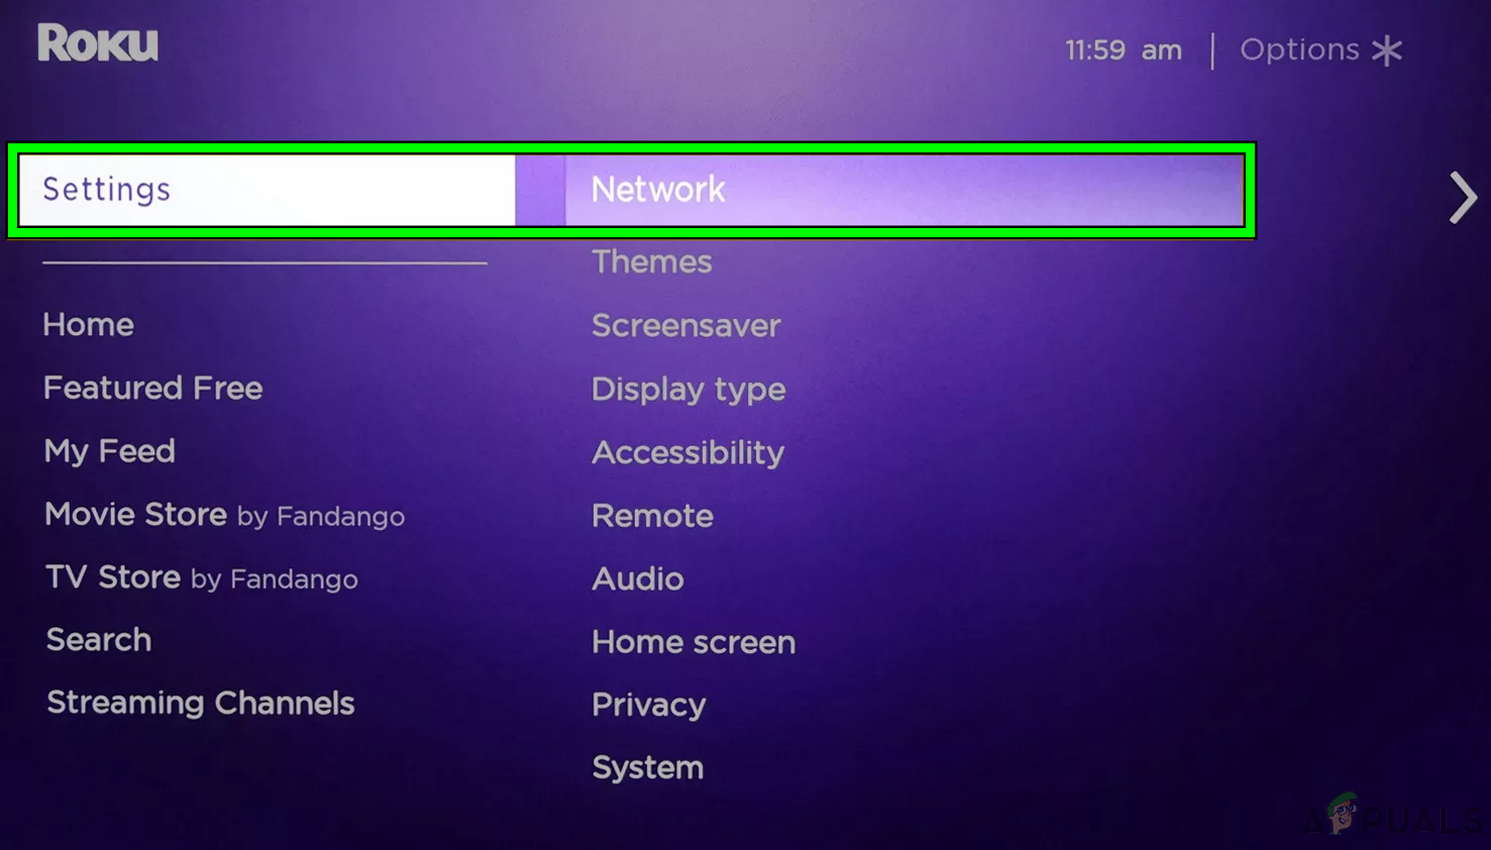 Open Network in the Roku Device Settings